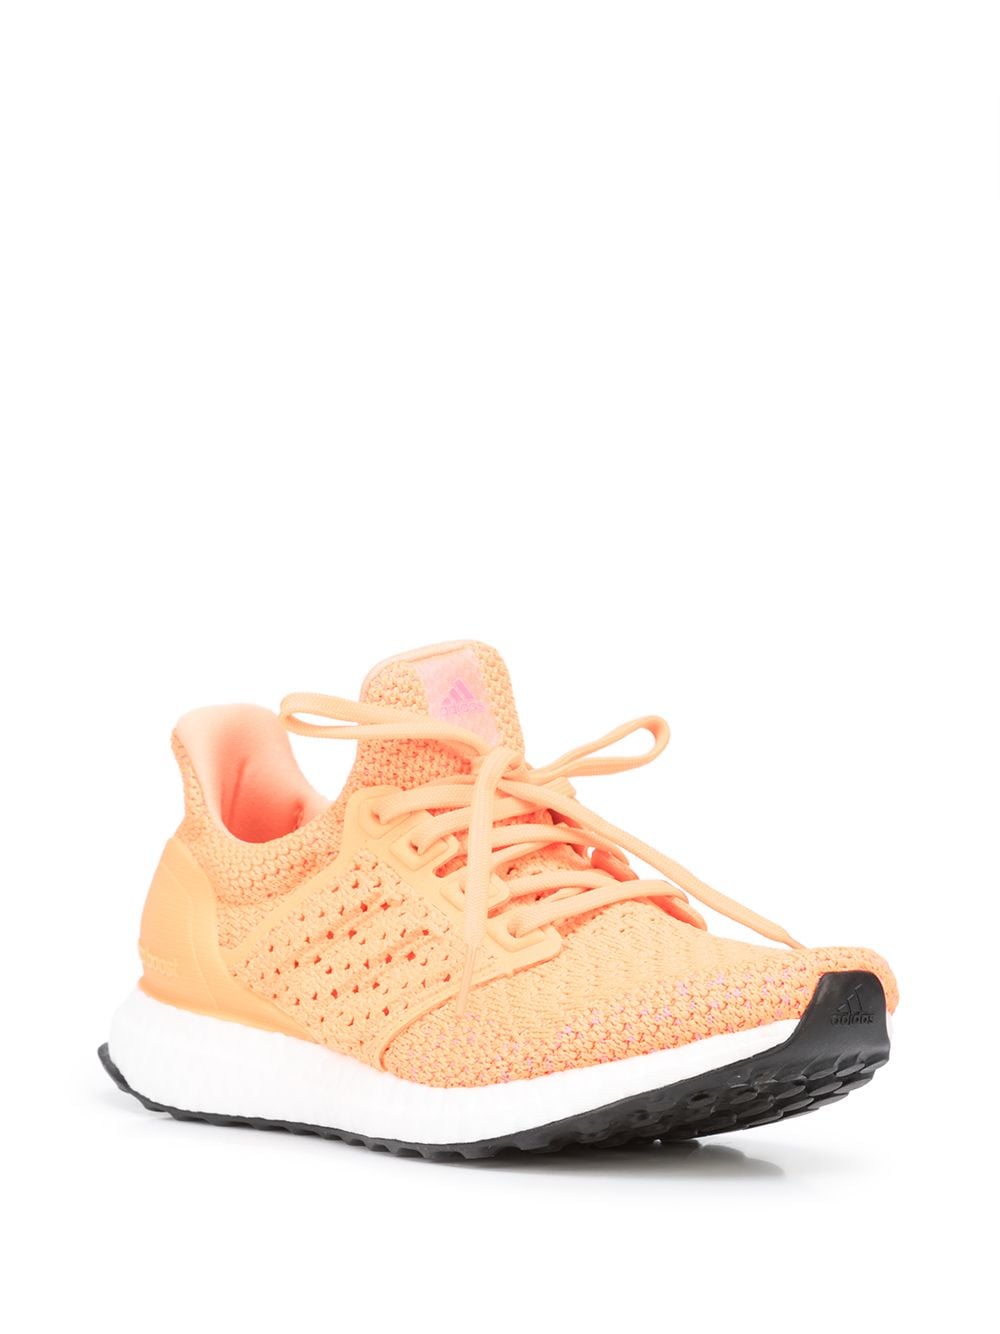 Adidas Ultraboost Clima DNA Performance Sneakers - Farfetch